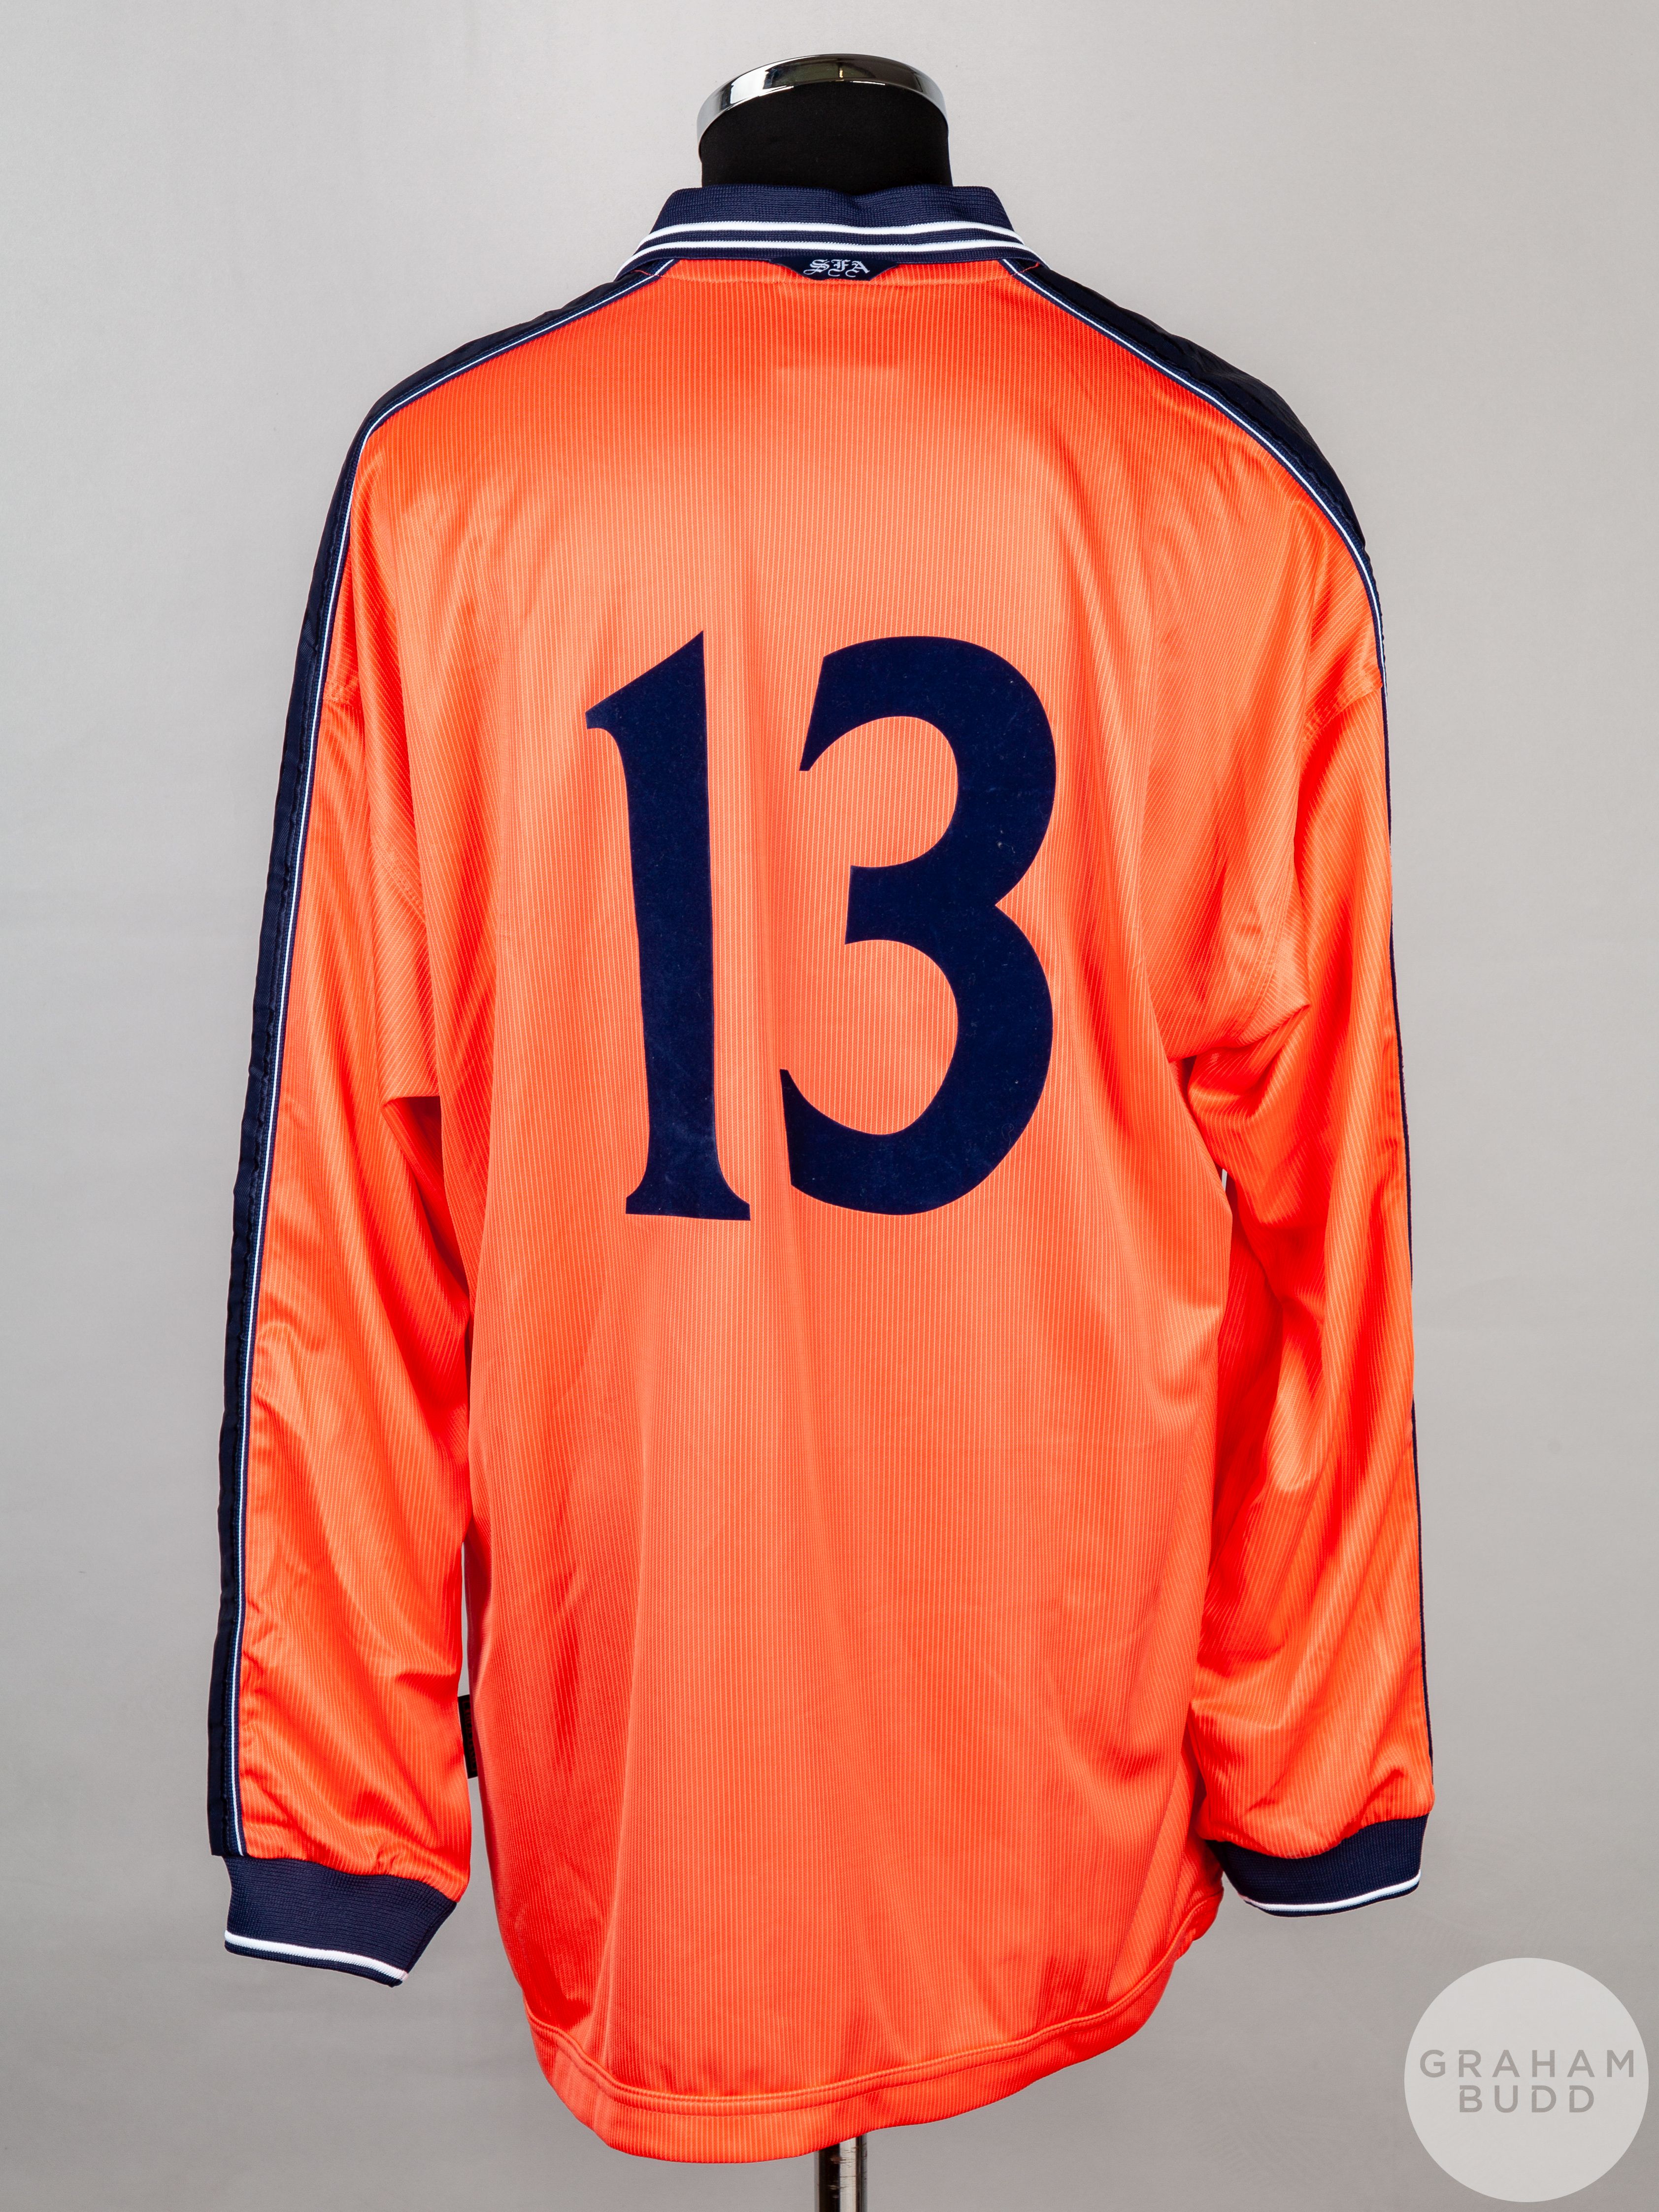 Derek Whyte salmon pink and blue No.13 Scotland v. Germany long-sleeved shirt - Image 2 of 5